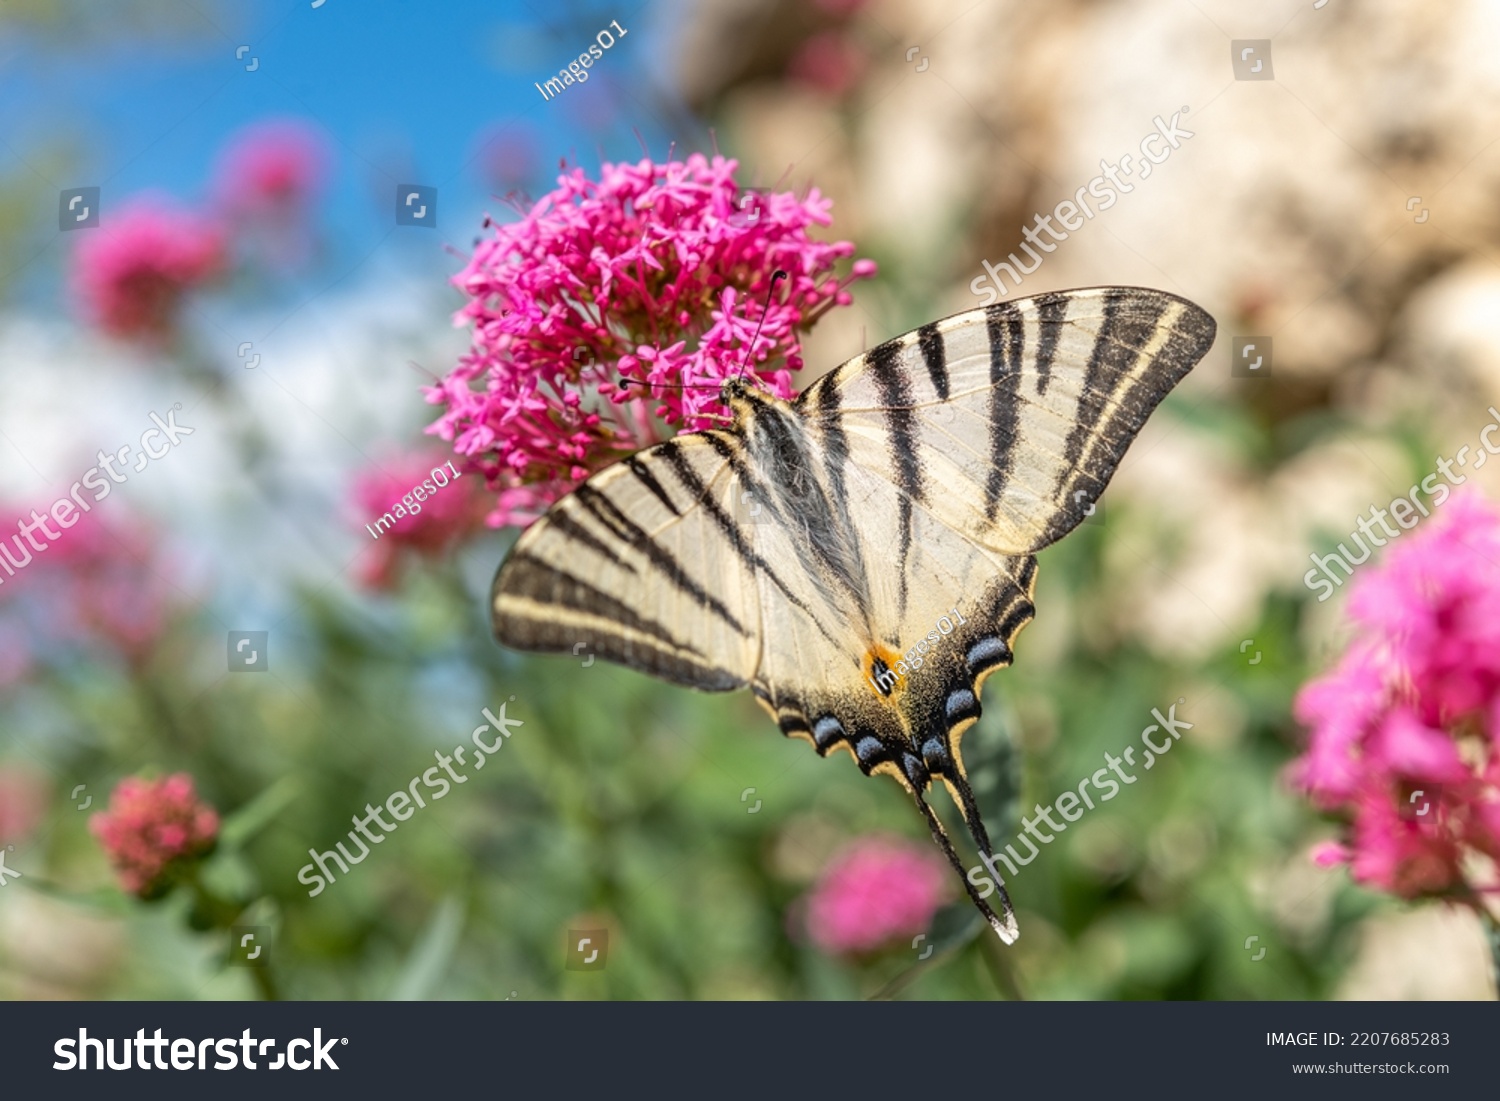 Scarce Swallowtail (Iphiclides podalirius) foraging for nectar on a flower in a garden. Cevennes, France. #2207685283